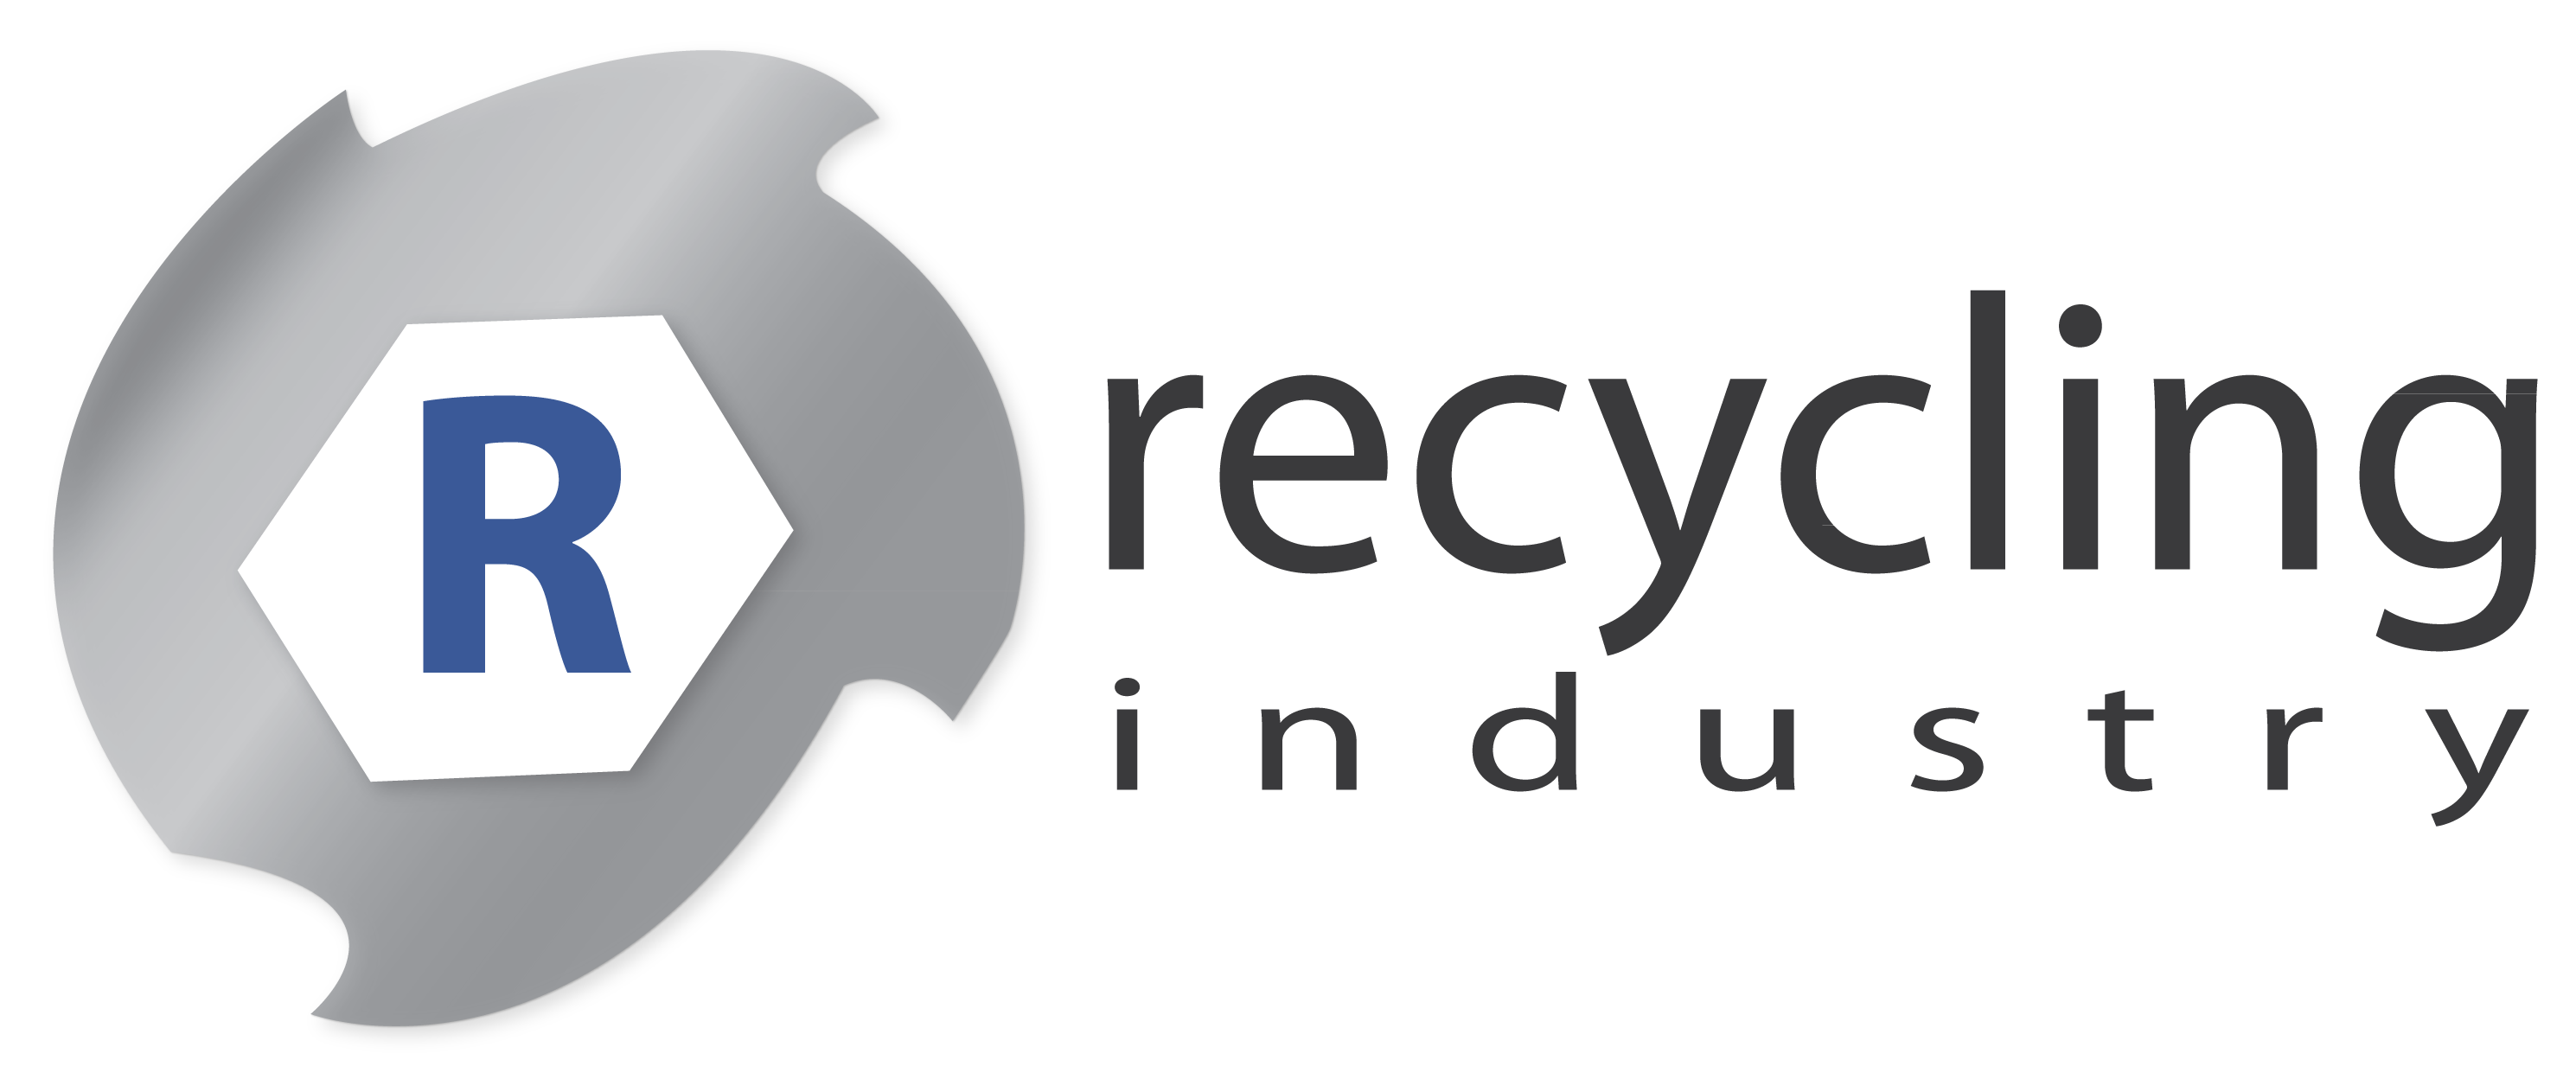 Recycling Industry